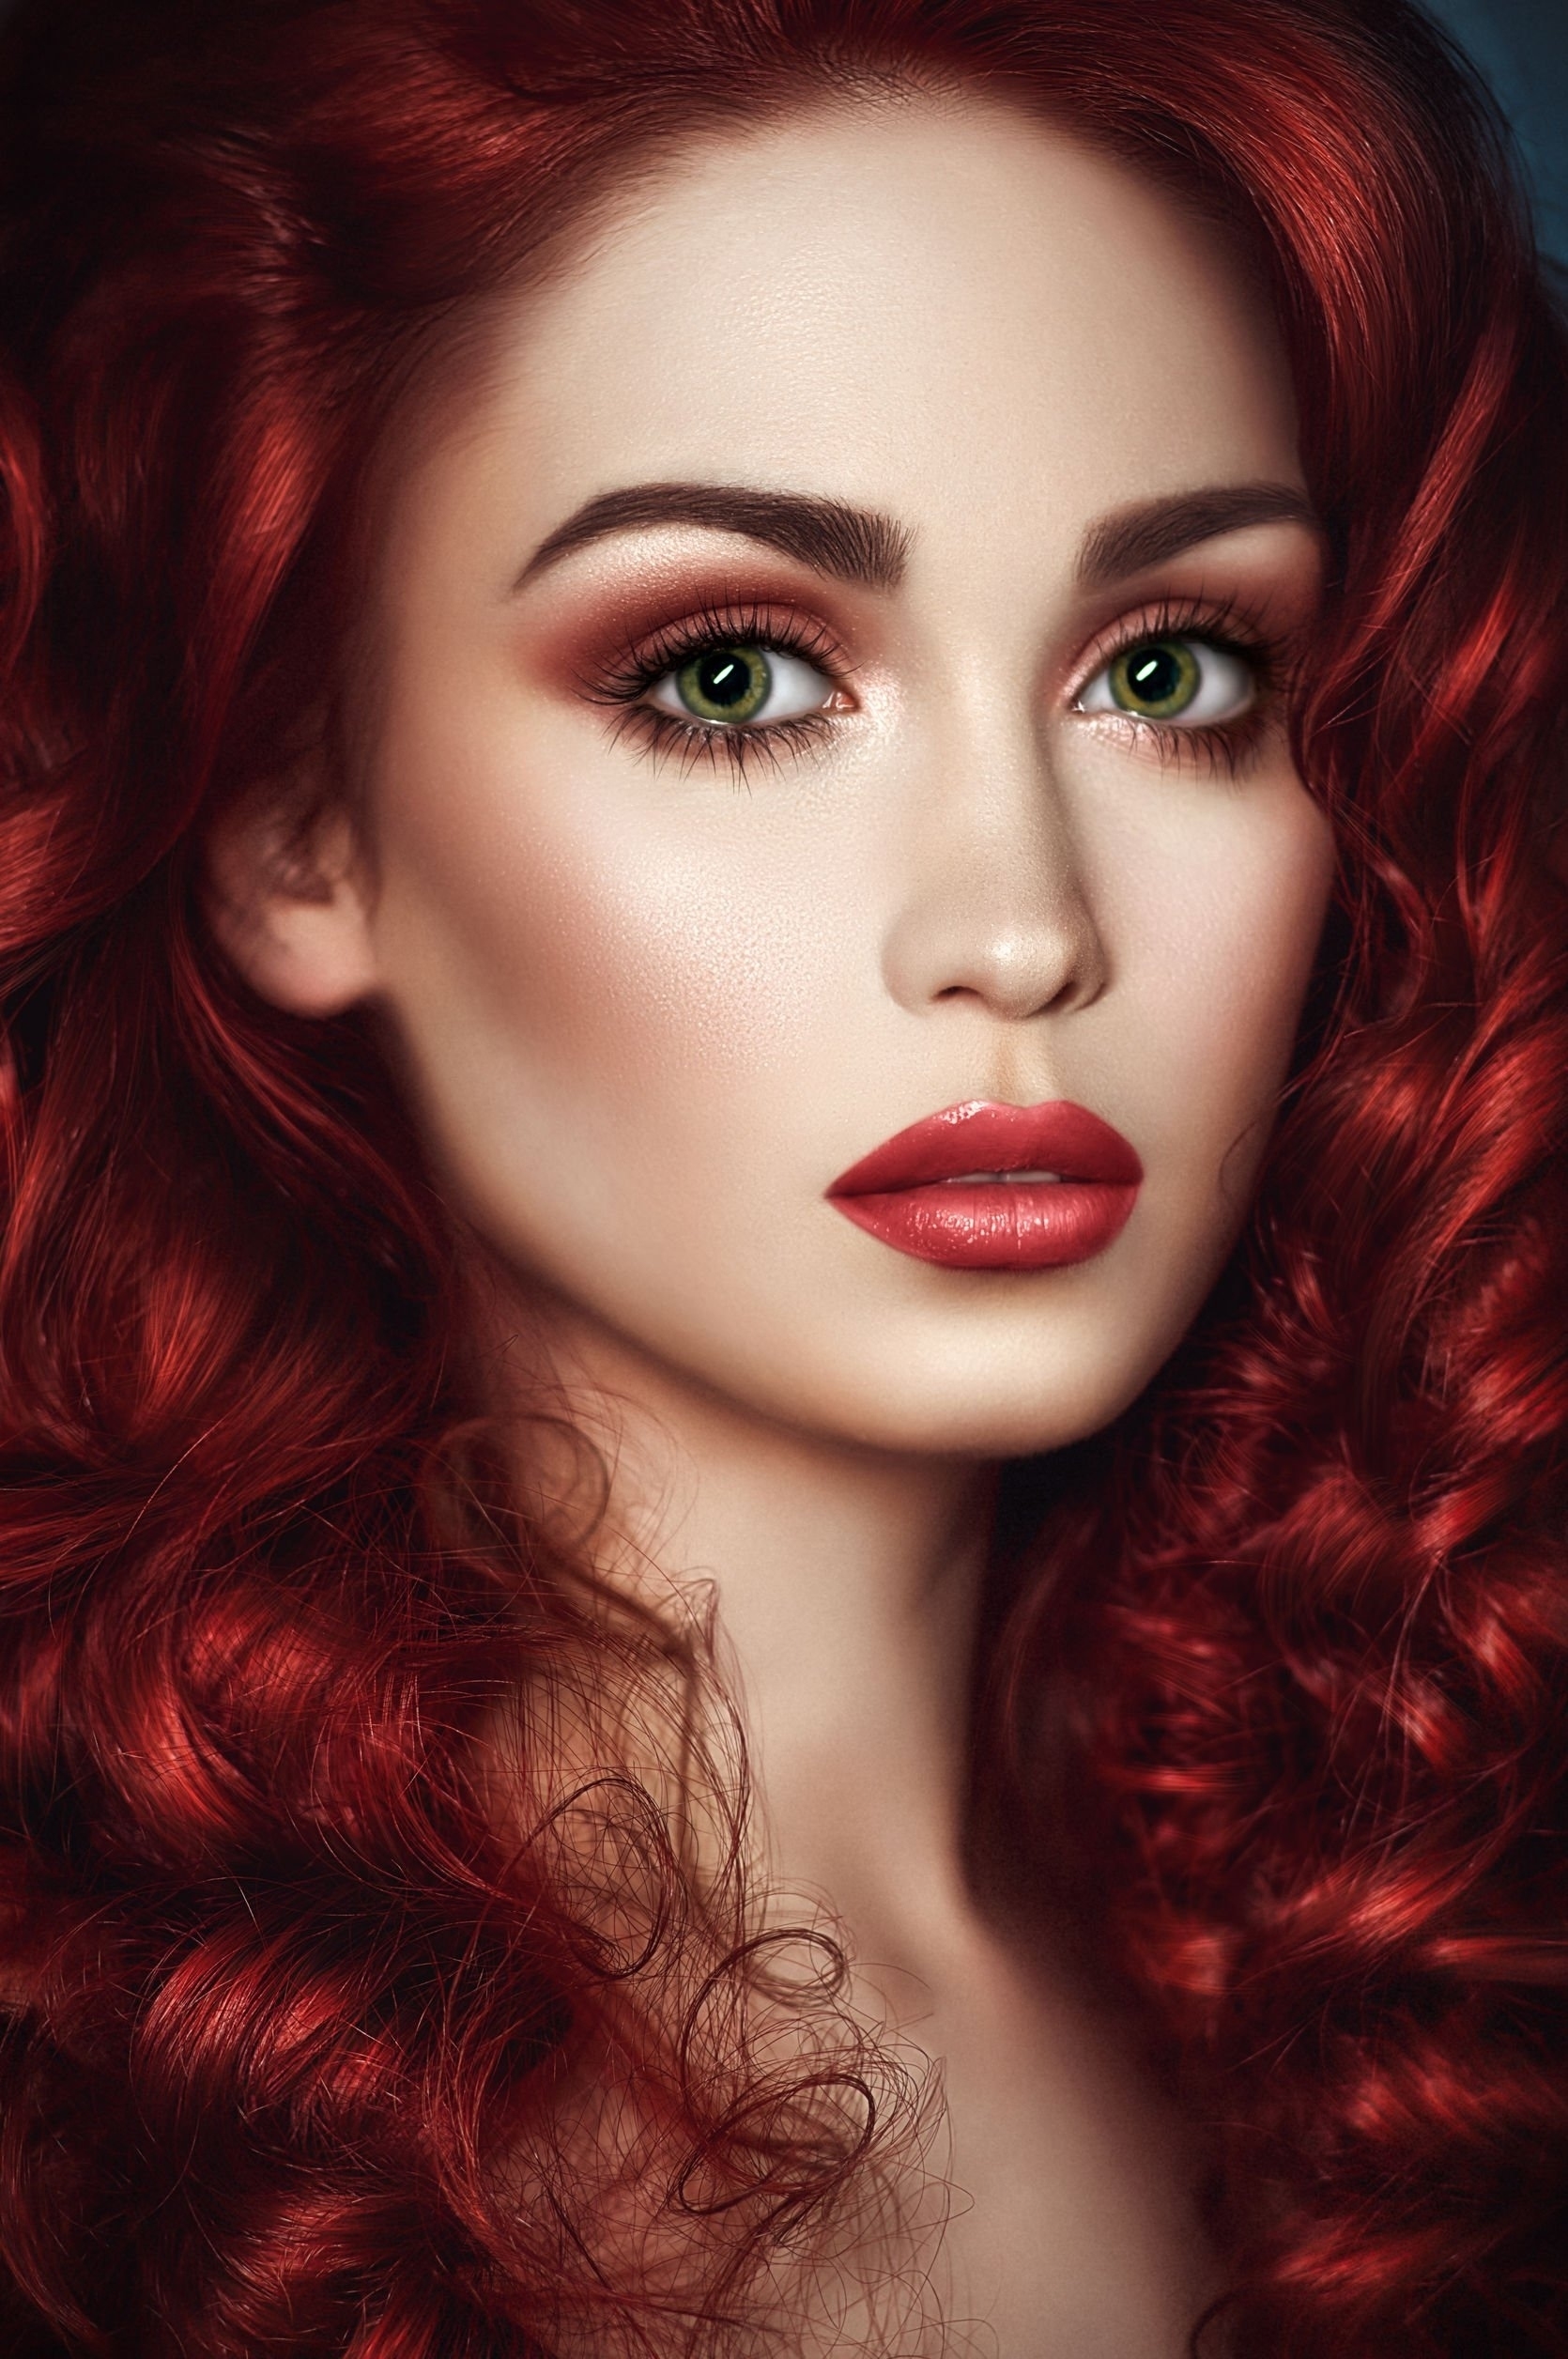 Makeup For Dark Red Hair And Green Eyes | Saubhaya Makeup intended for Best Eyeshadow Color For Green Eyes And Red Hair